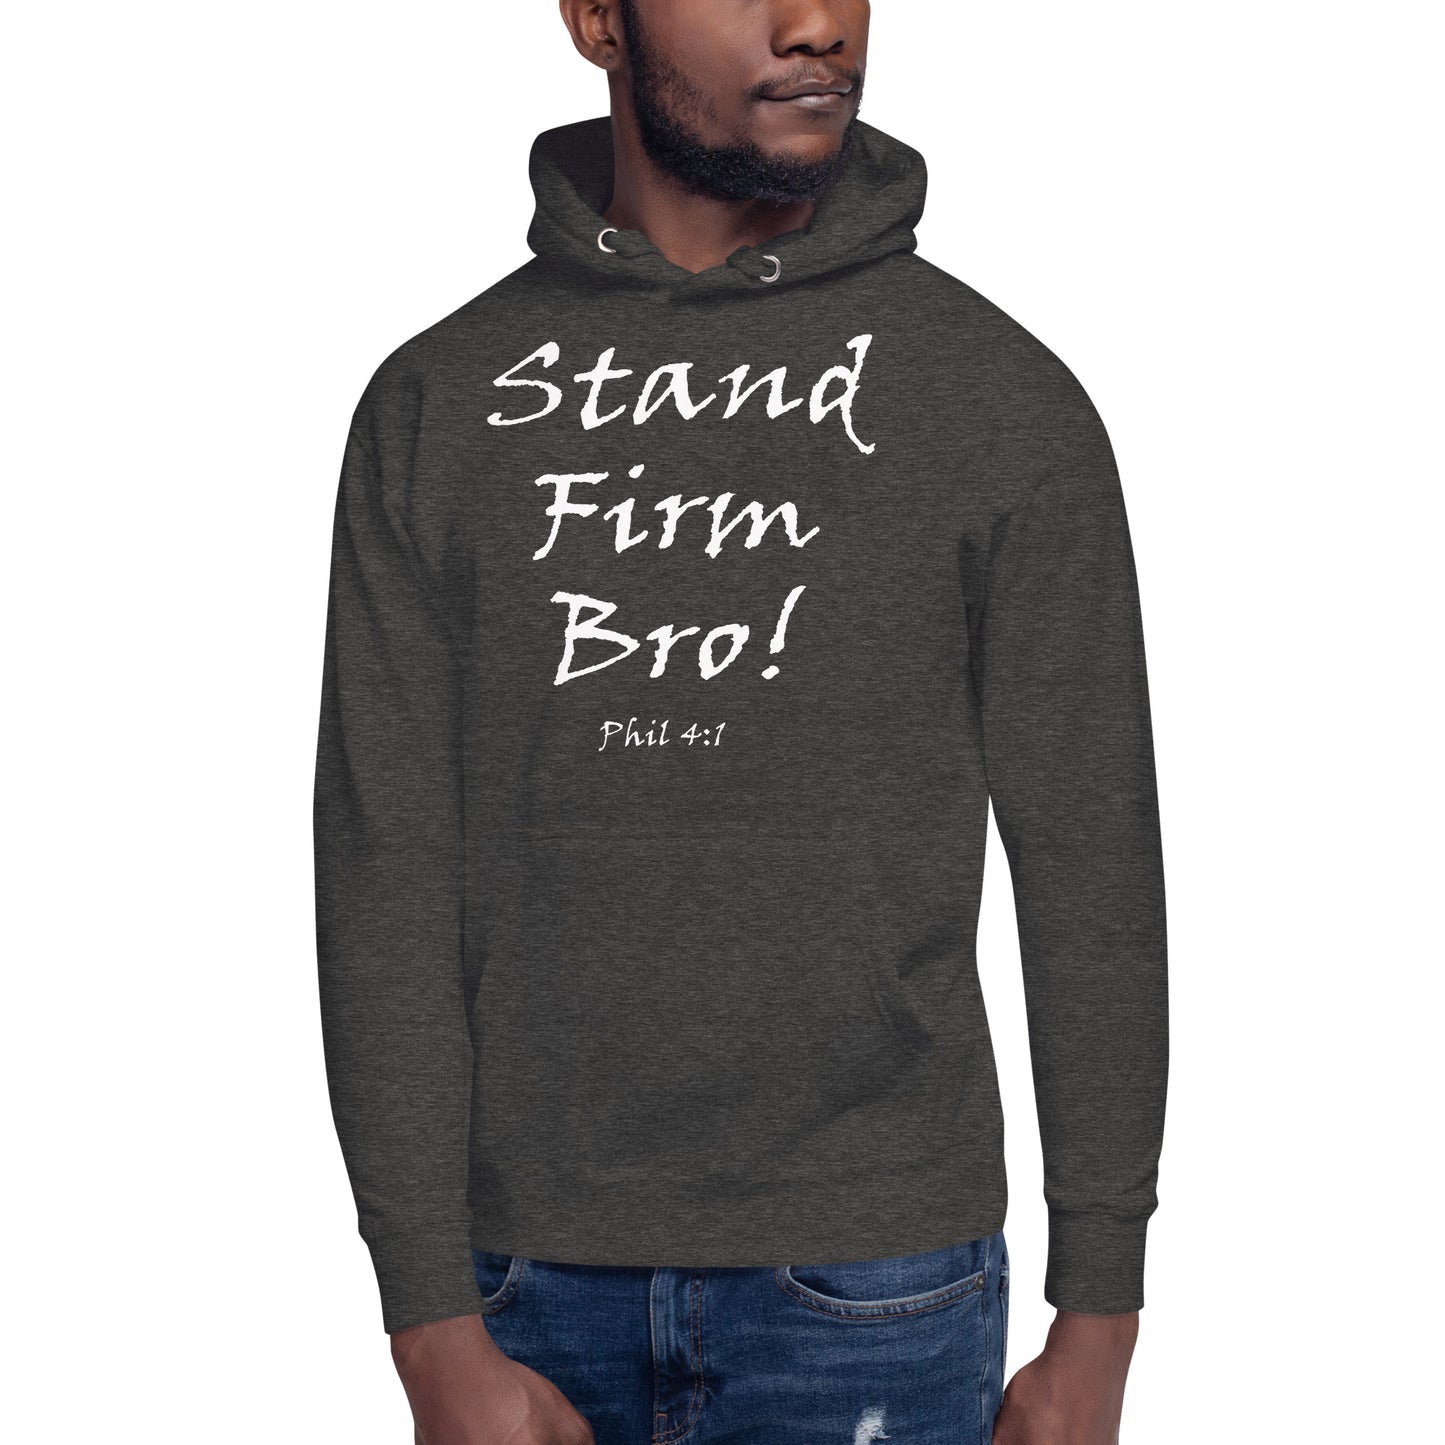 Stand Firm Bro! Unisex Hoodie - Solid Rock Designs | Christian Apparel